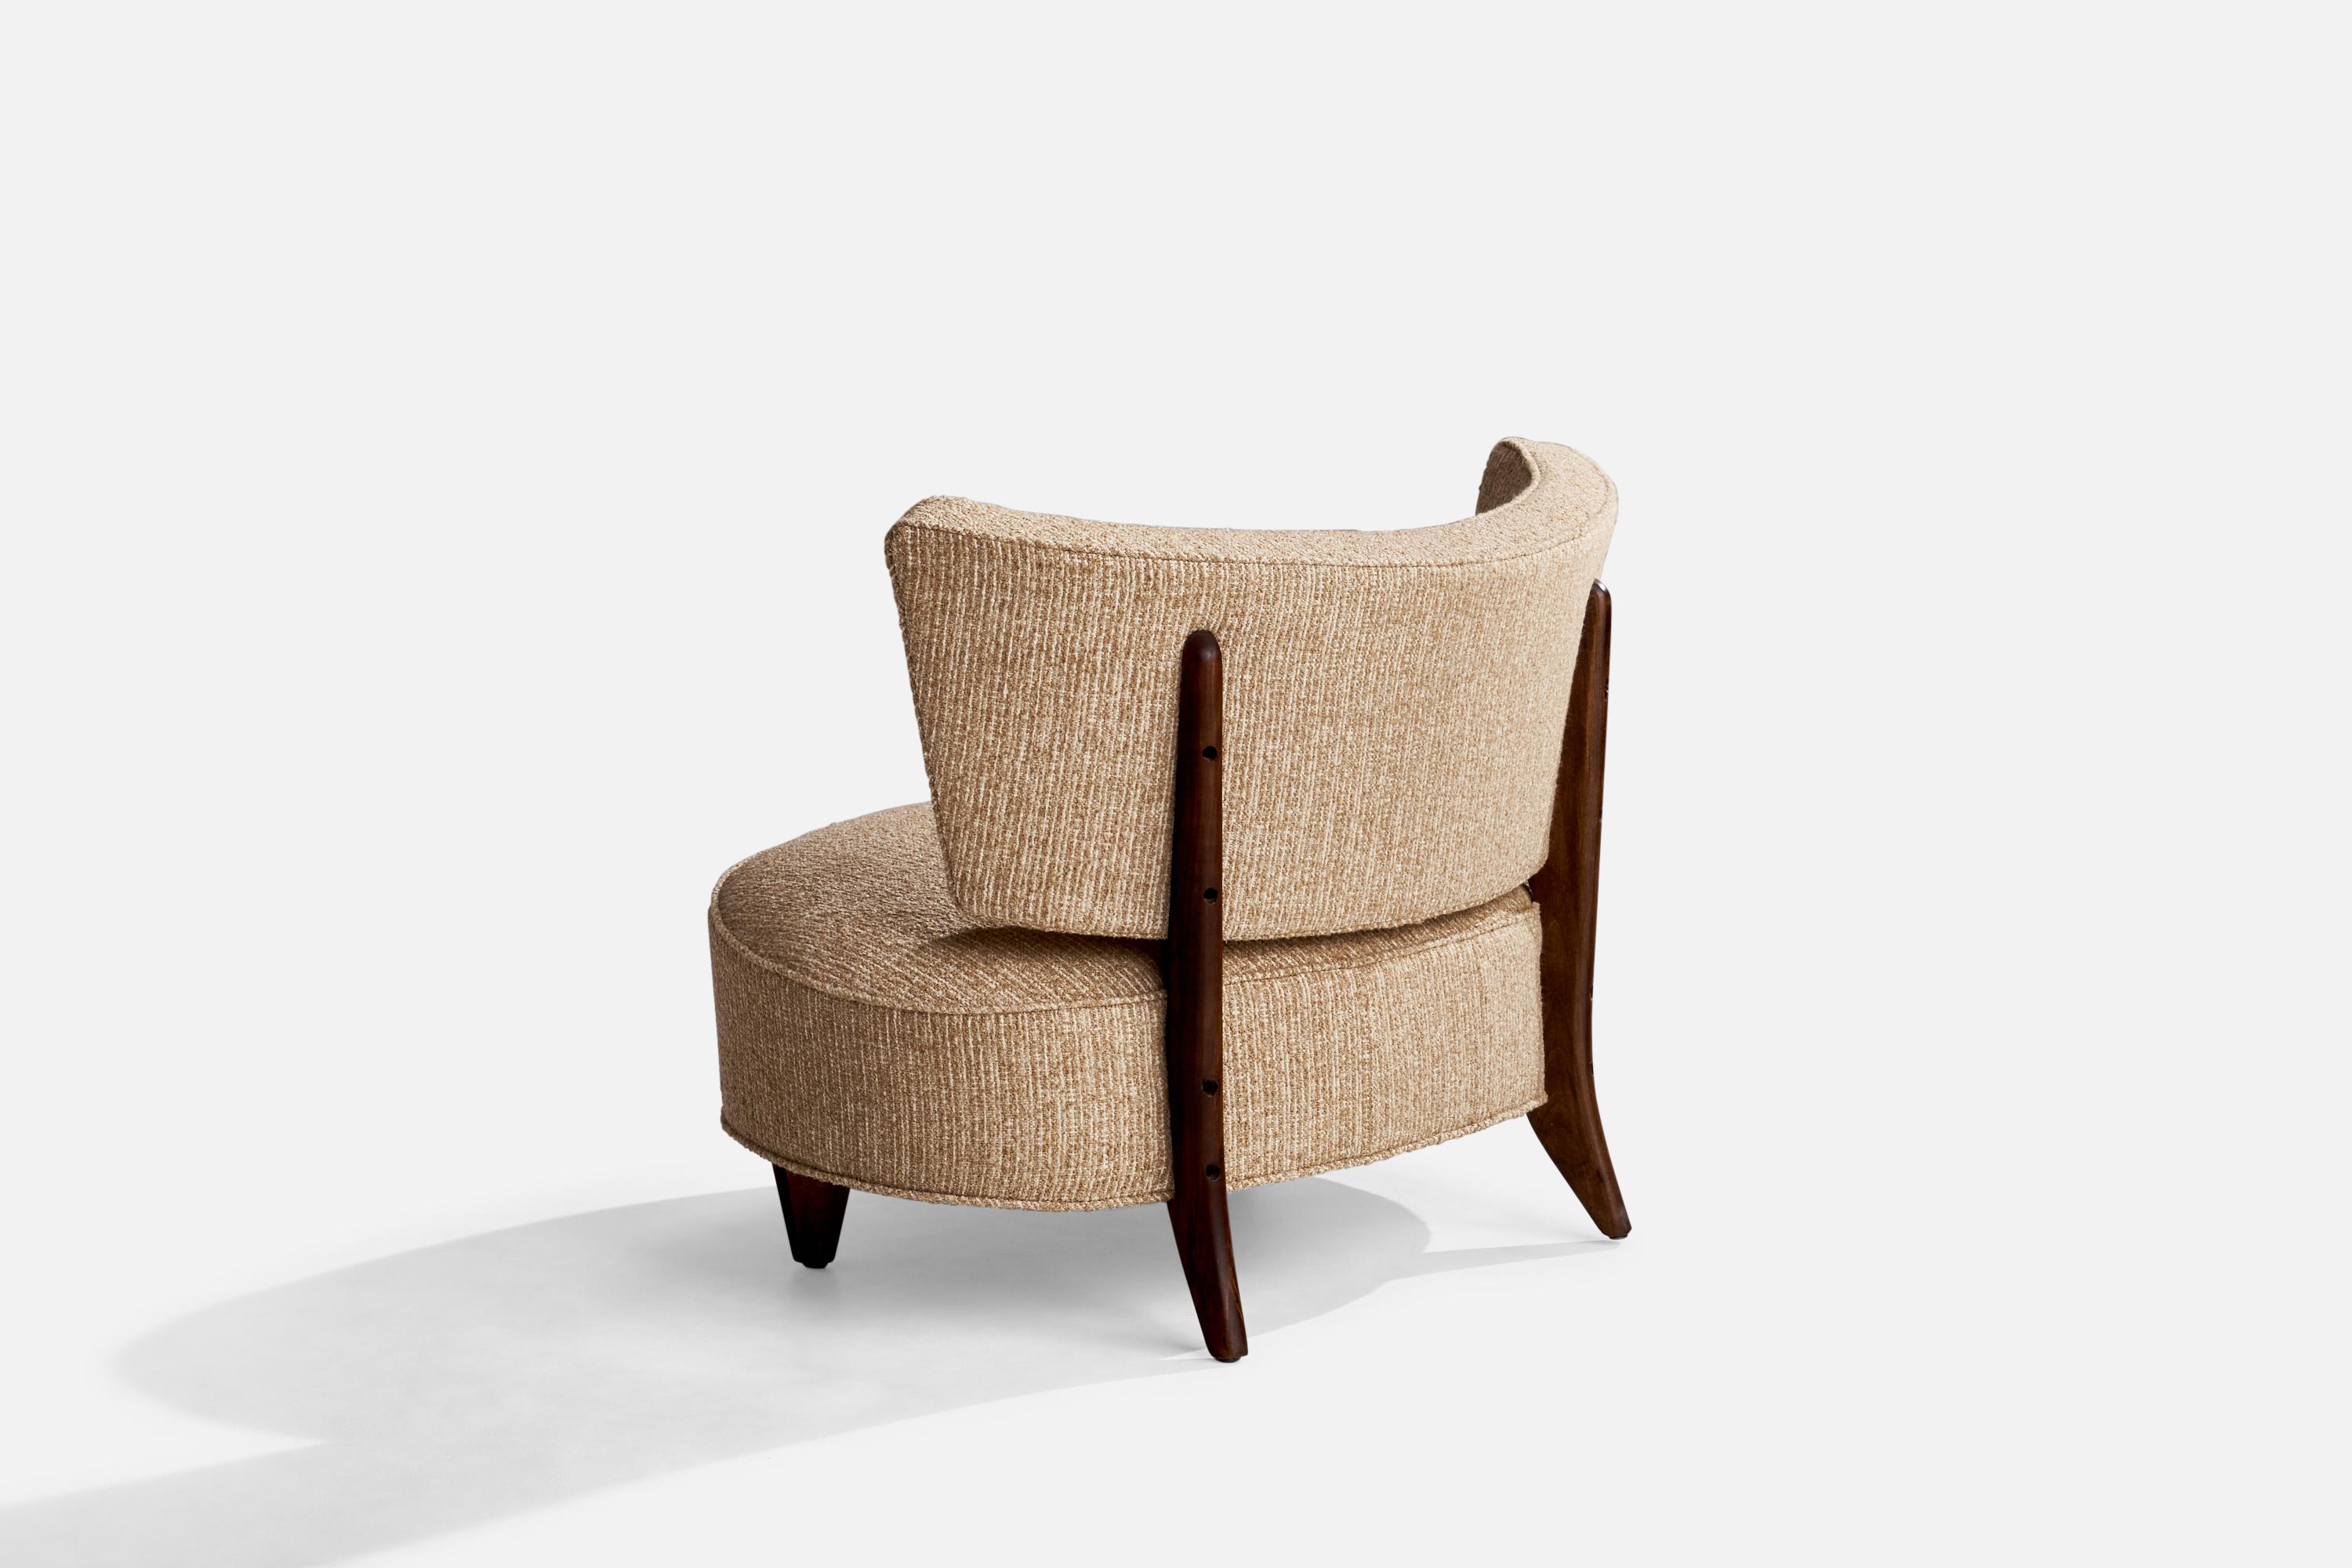 Mid-20th Century Gilbert Rohde, Slipper Chair, Fabric, Wood, USA, 1940s For Sale